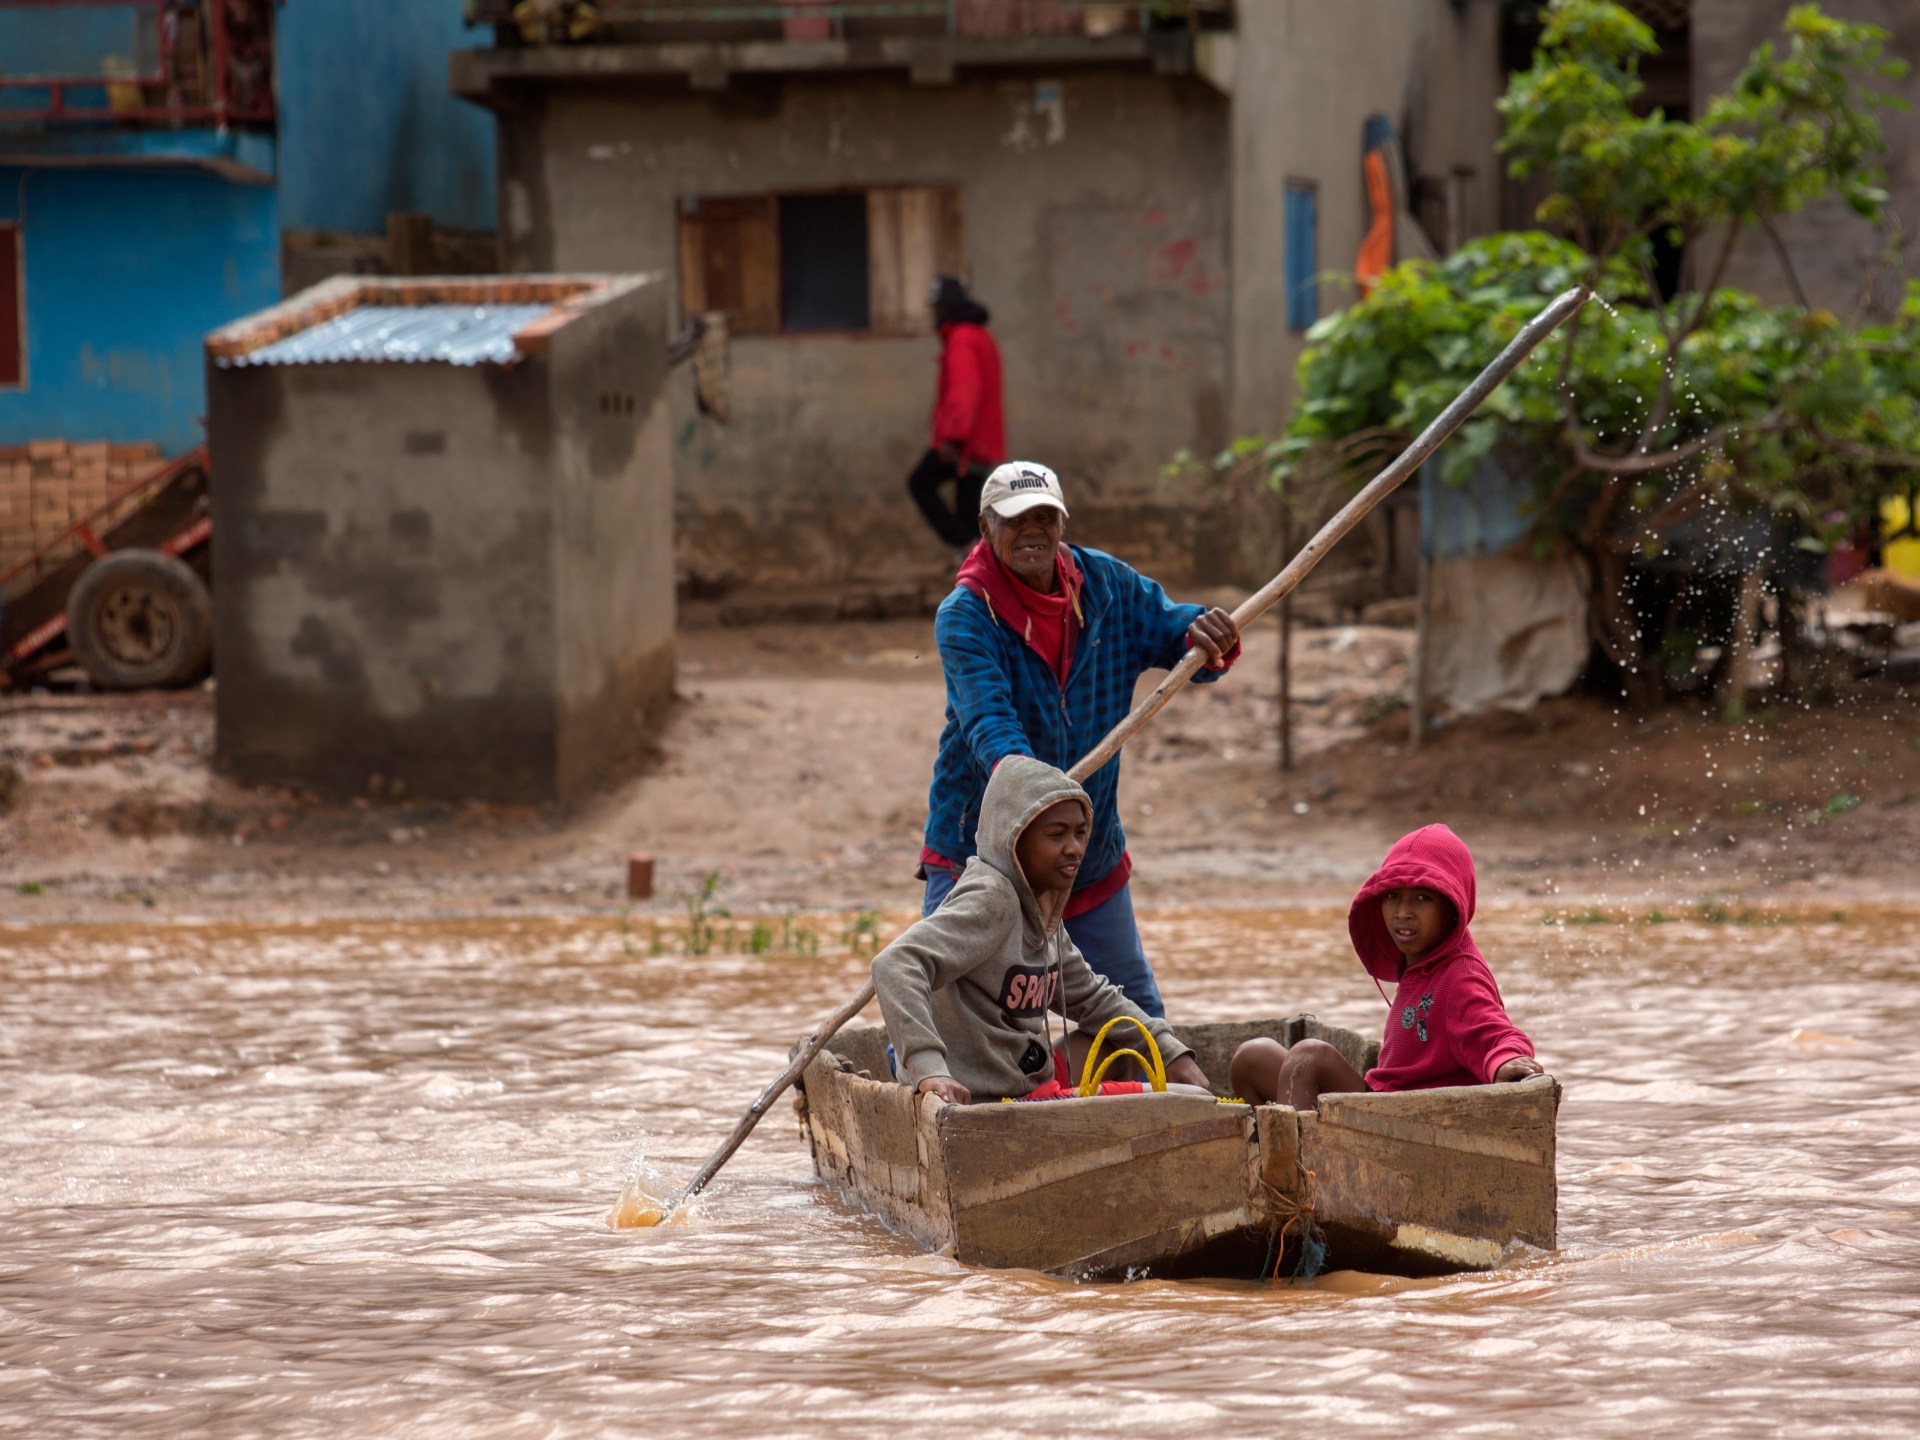 Cyclone in Madagascar kills dozens, displaces tens of thousands